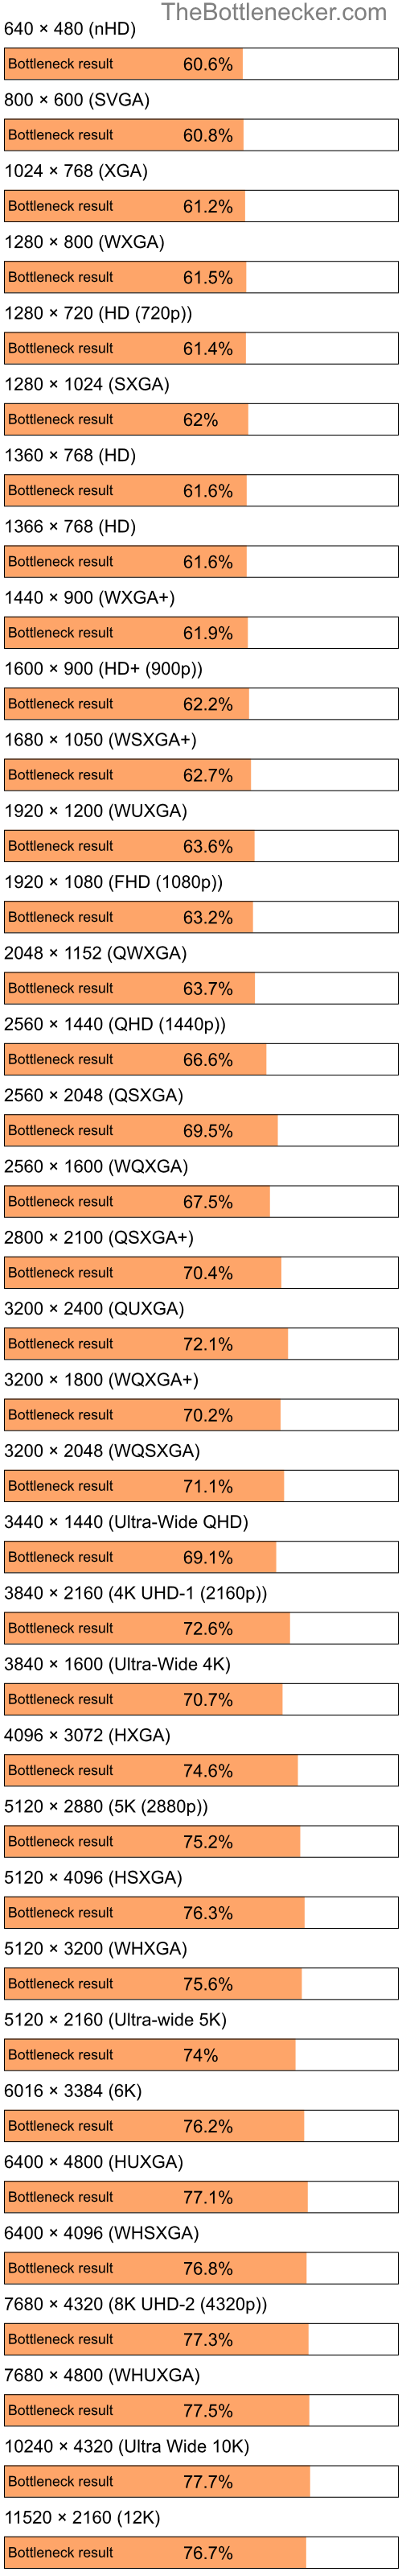 Bottleneck results by resolution for Intel Pentium 4 and NVIDIA GeForce 6800 XT in7 Days to Die